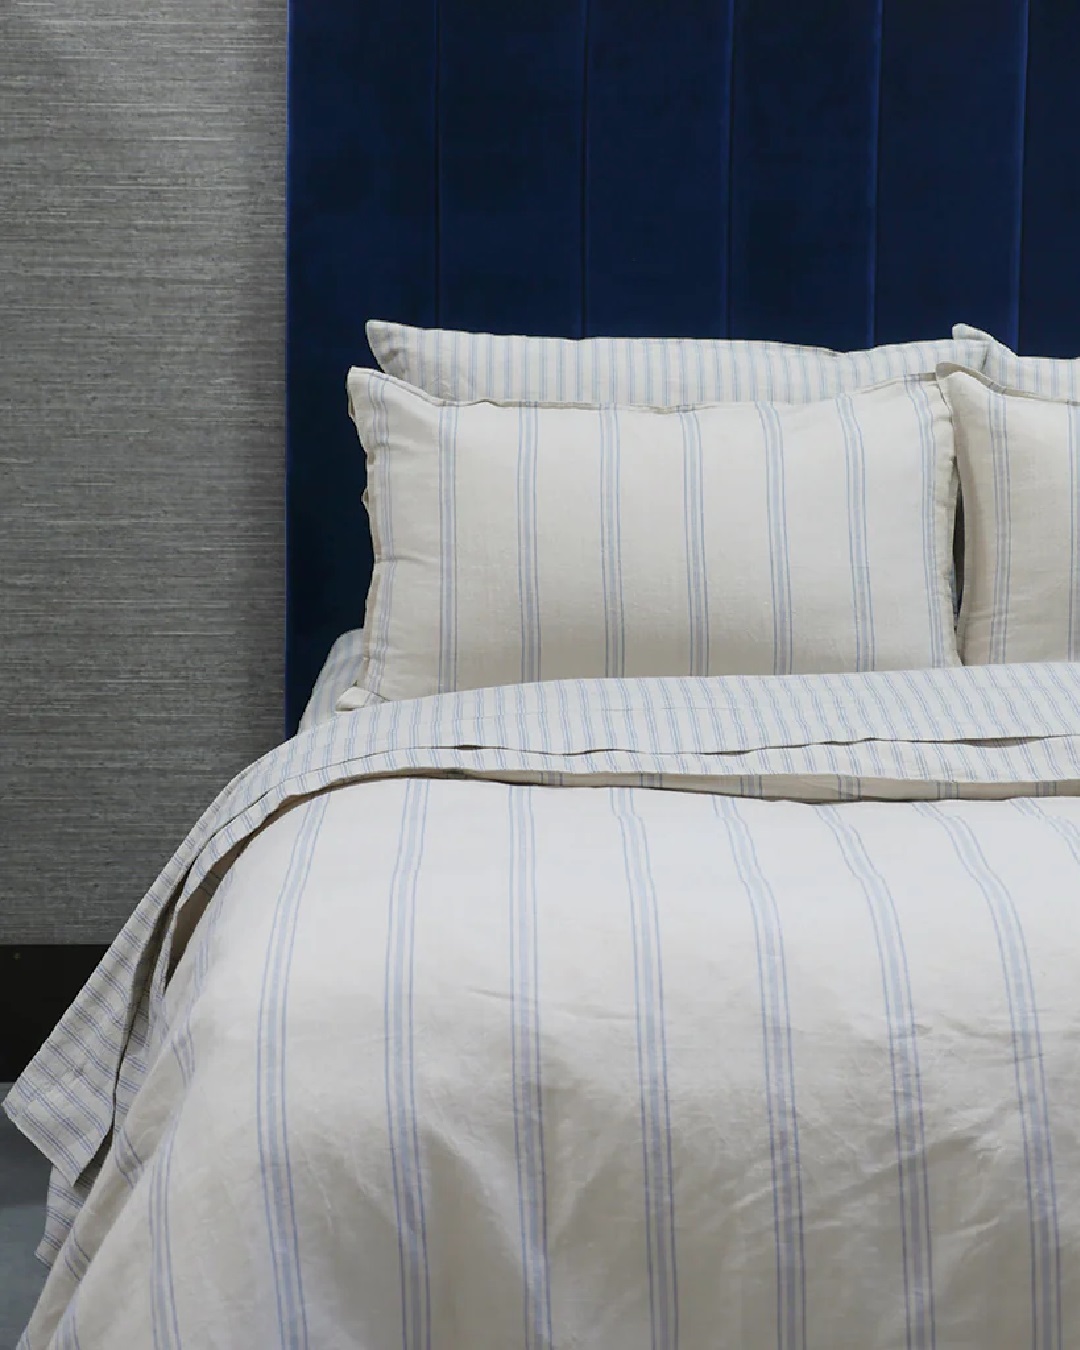 Striped blue and white sheets and duvet on bed with pillows